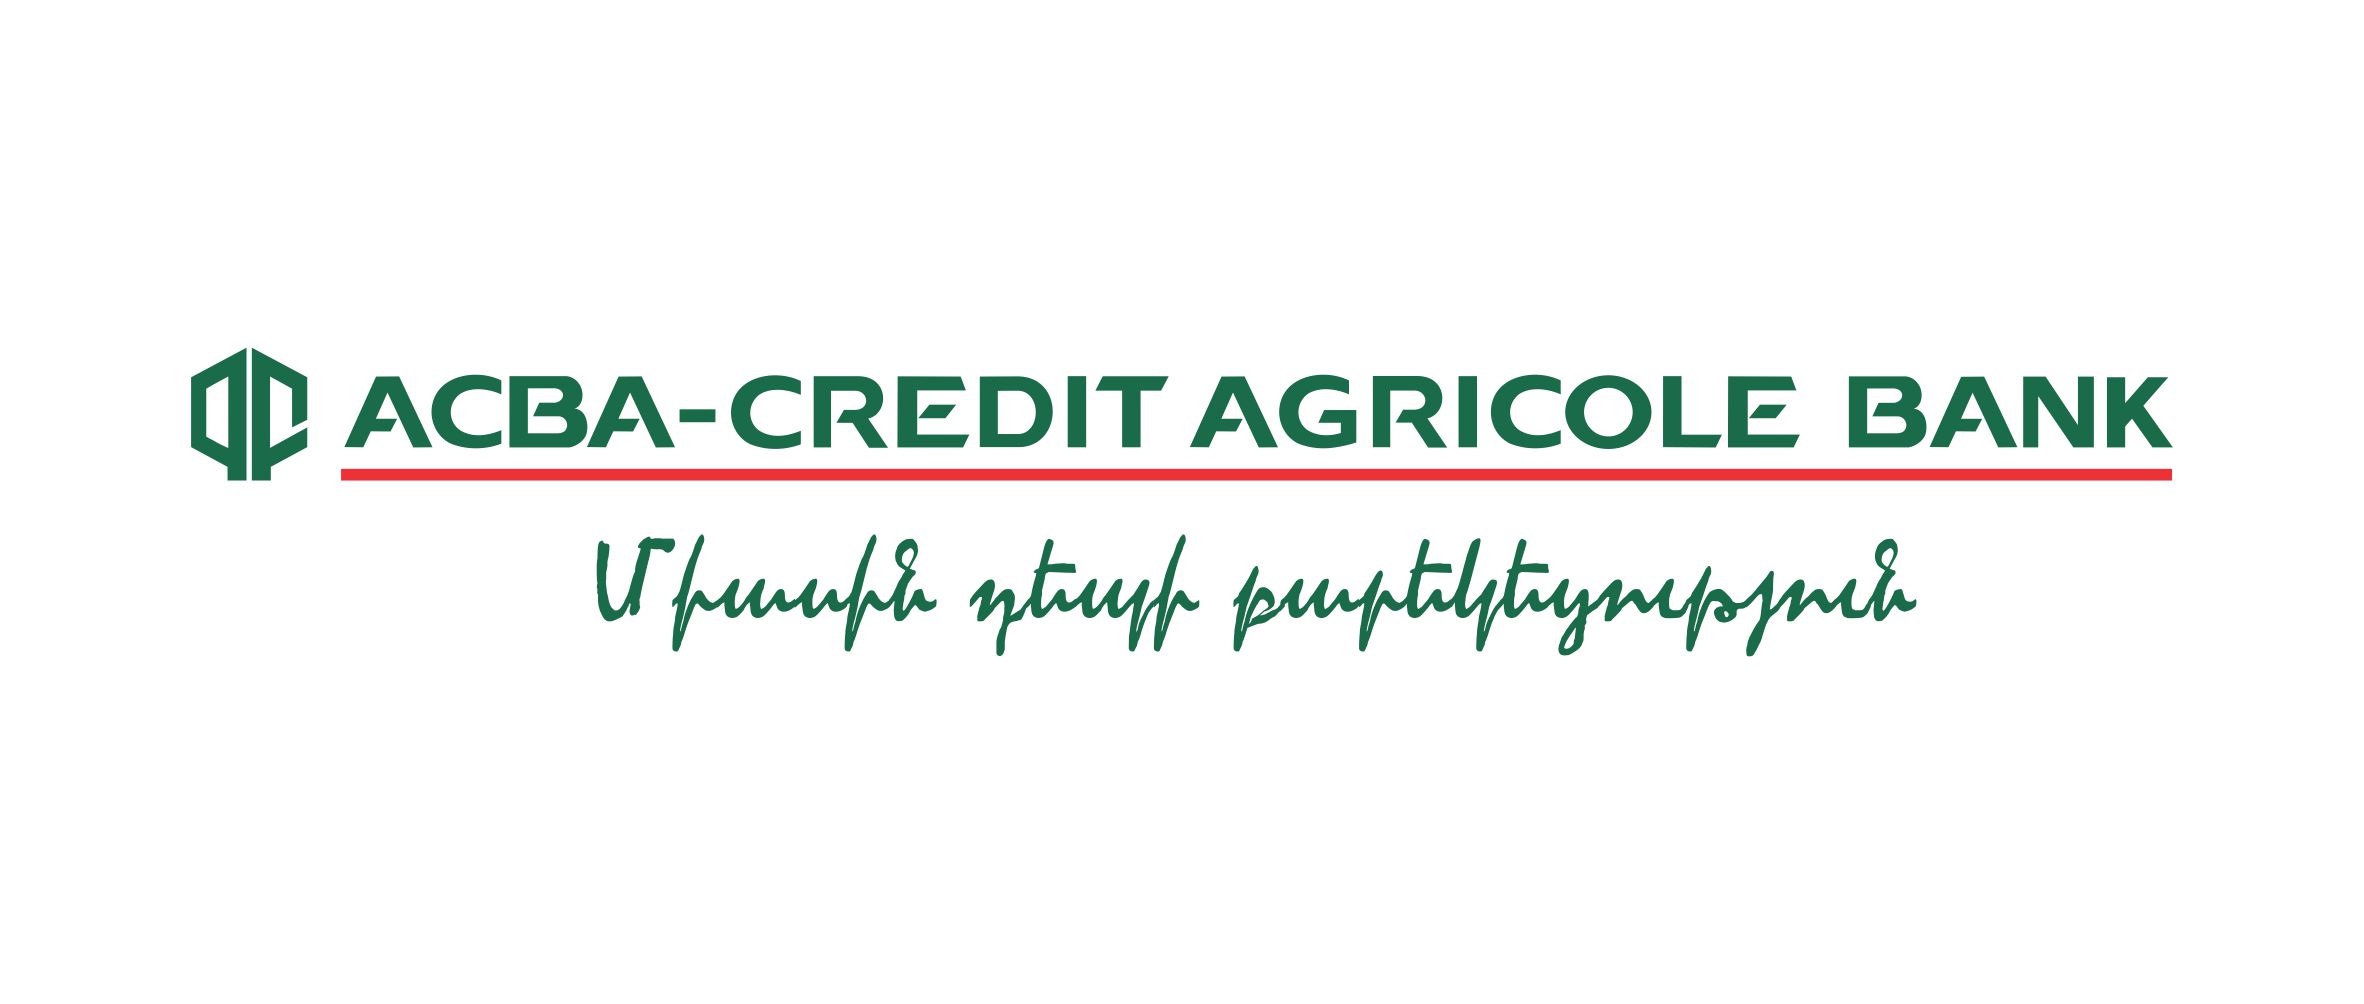 ACBA-Credit Agricole Bank started public placement of AMD 1 billion  bonds